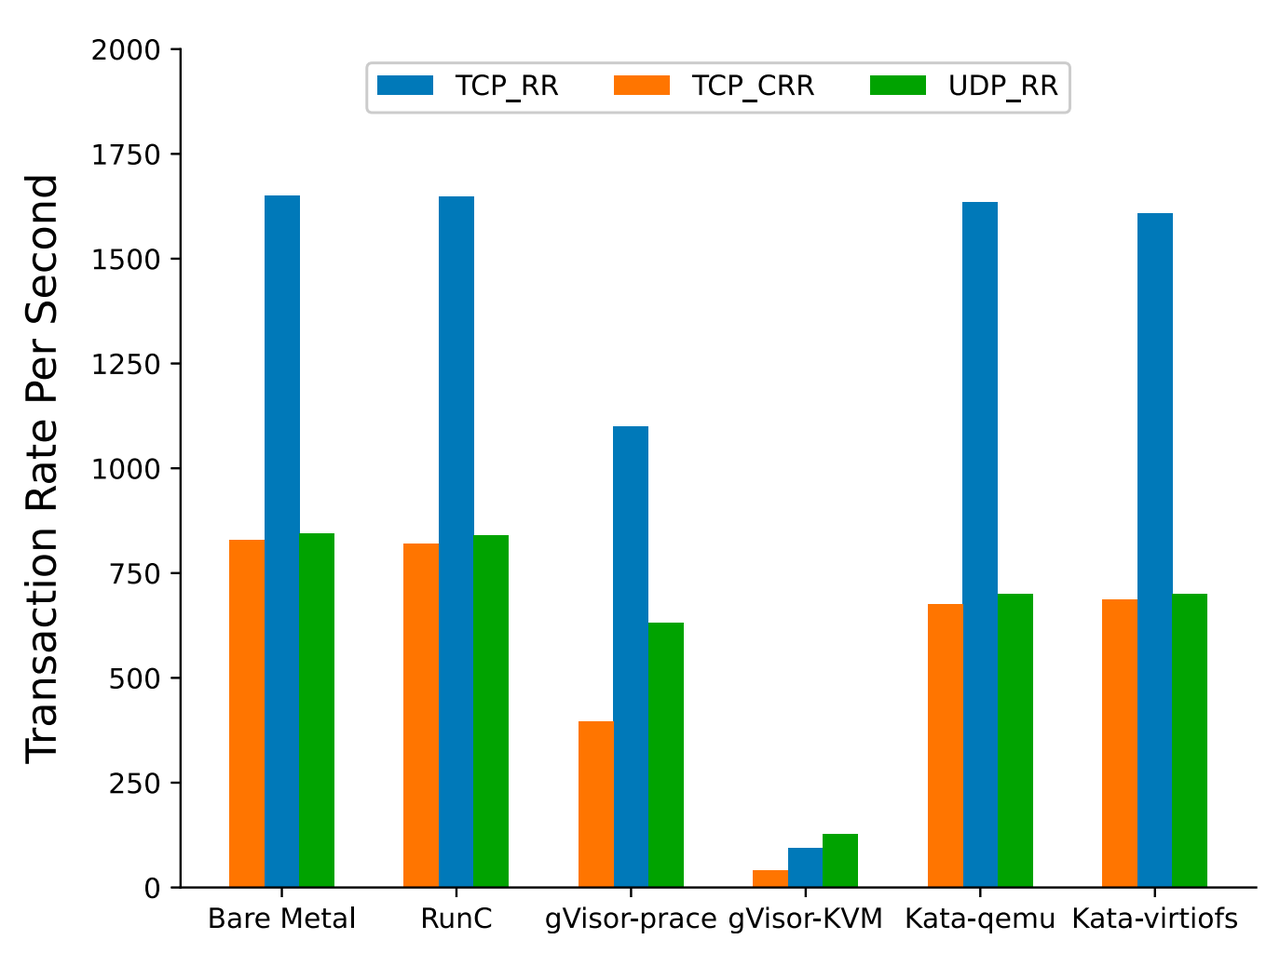 TCP_RR, TCP_CRR and UDP_RR performance